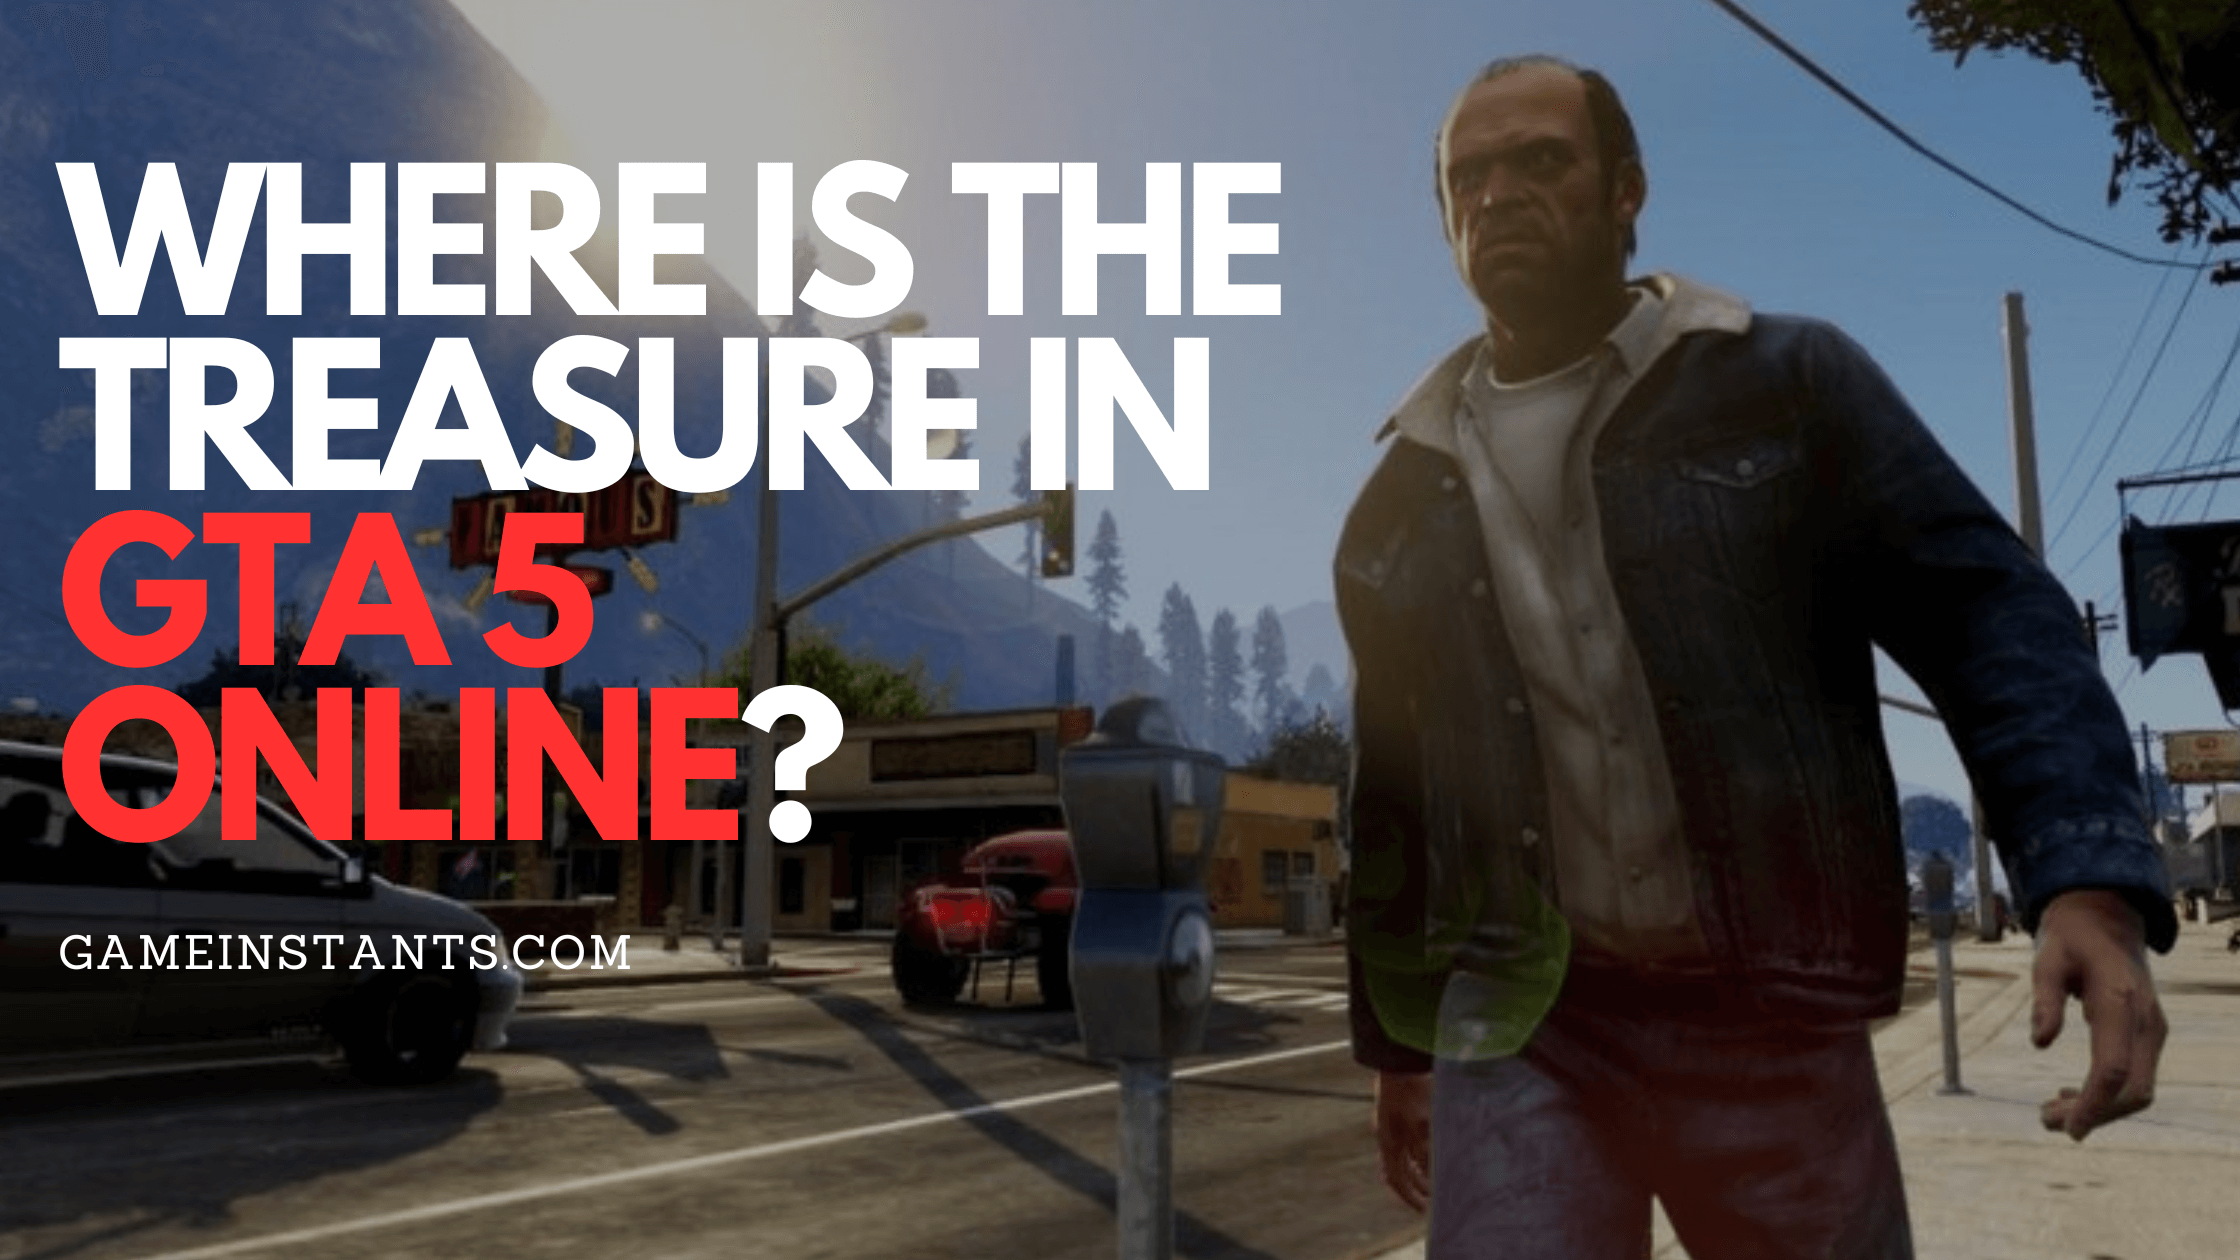 Where is the Treasure in GTA 5 Online